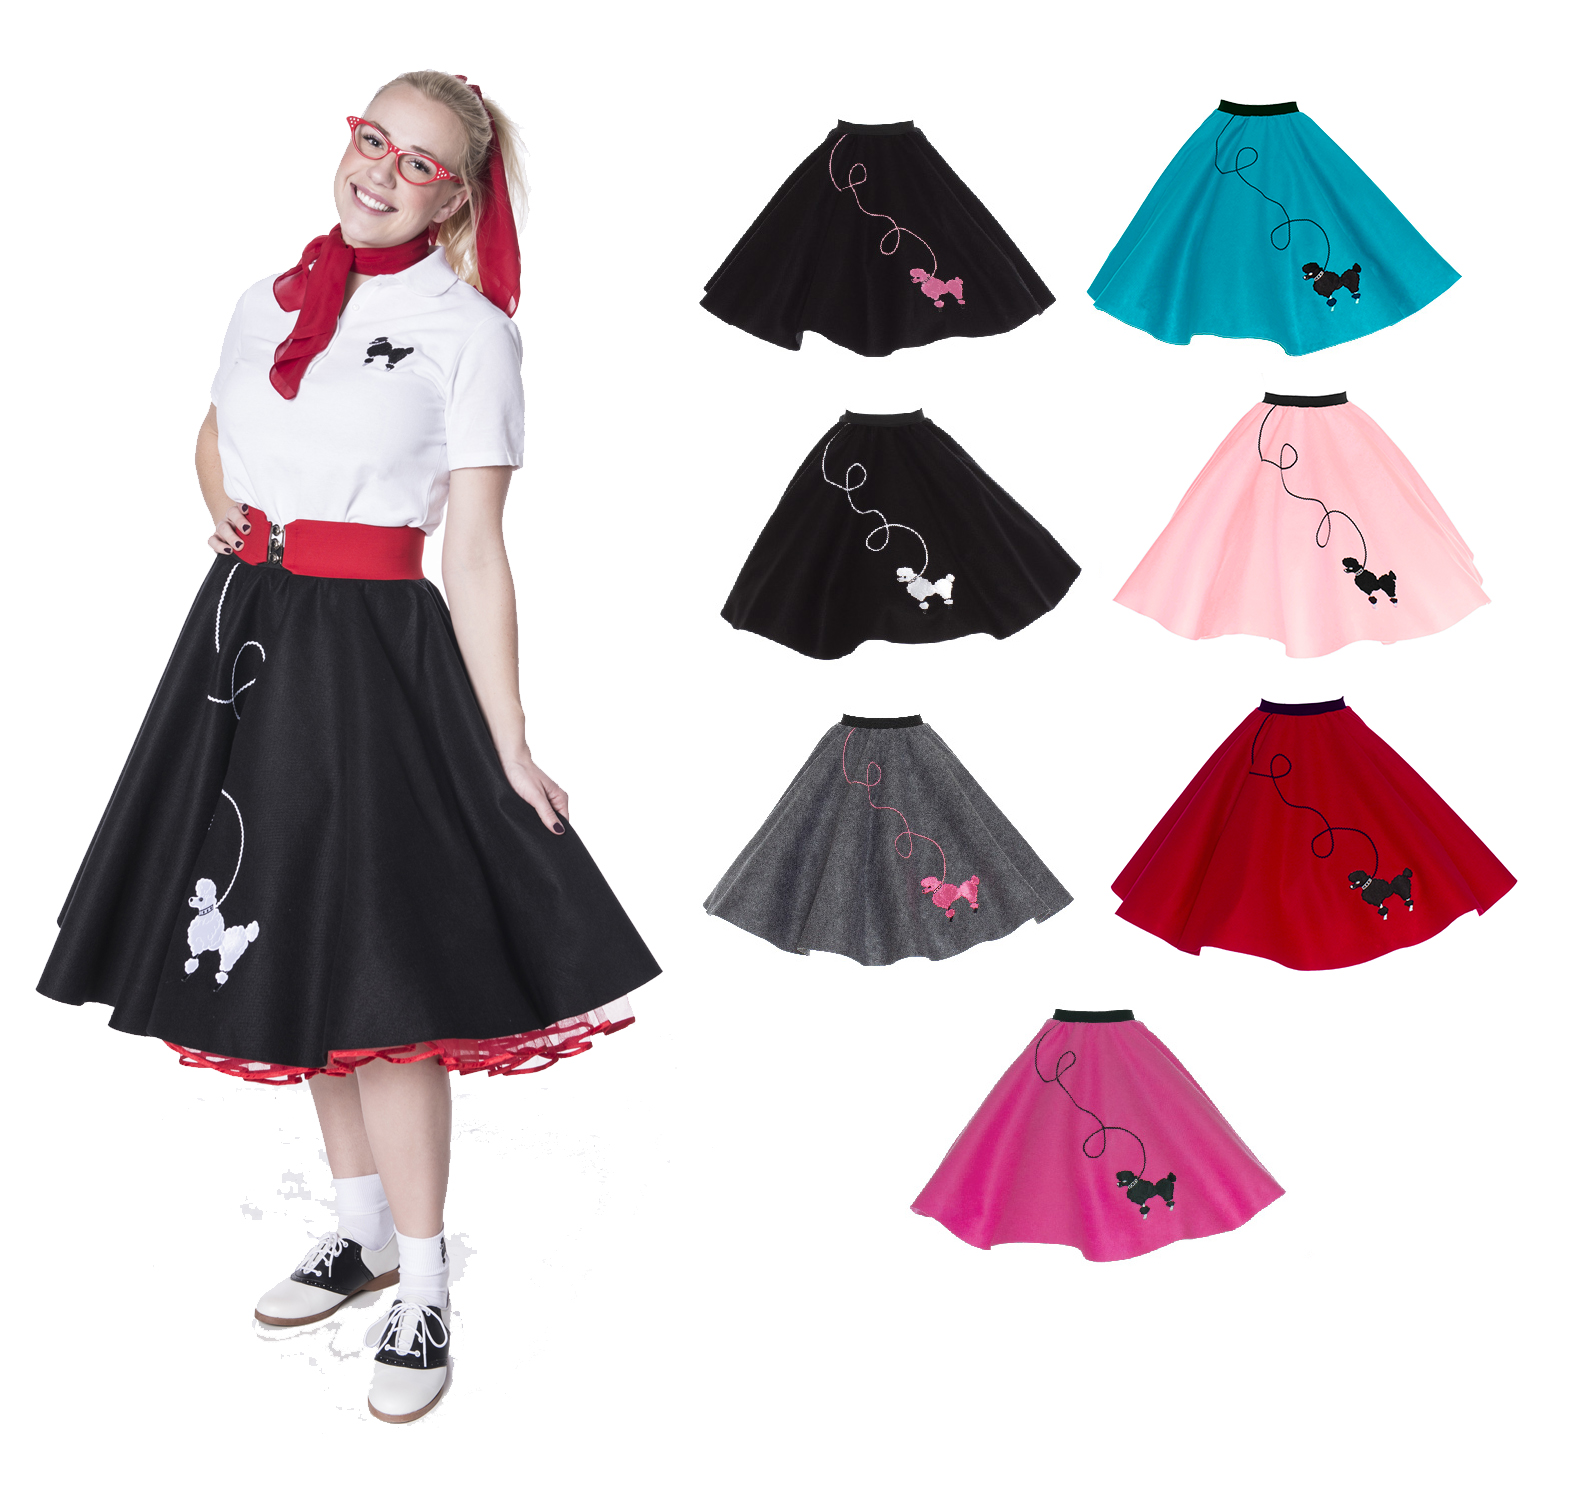 Adult Pc 50's Poodle Skirt Outfit | demo.duepuntiassociazione.it